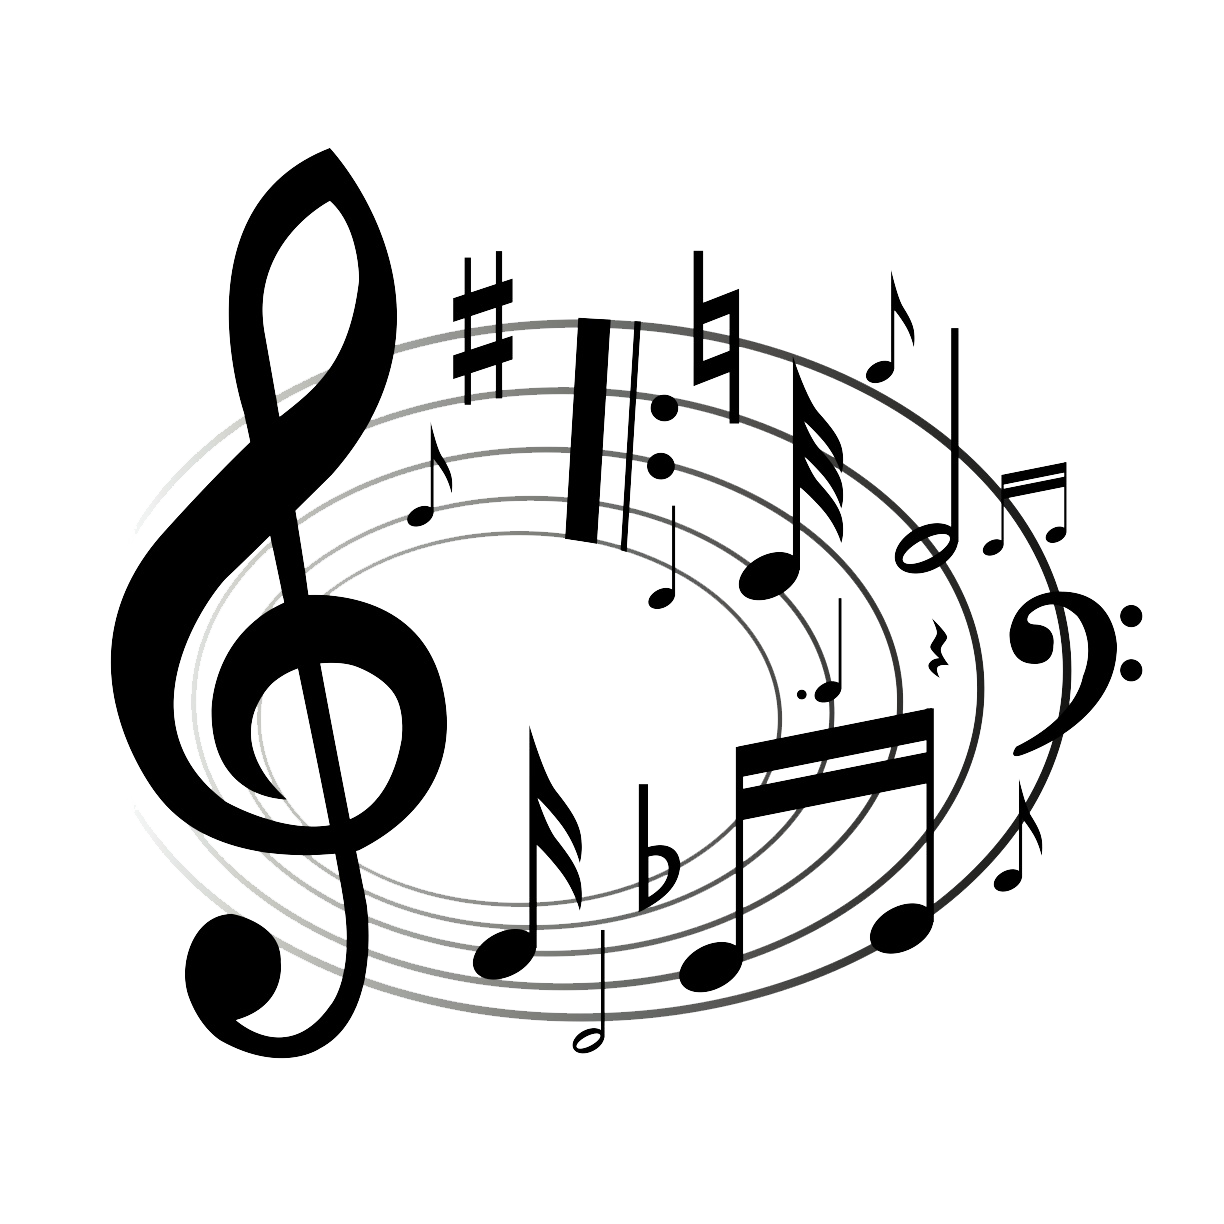 Music Notes Clipart Black And White | Clipart Panda - Free Clipart ...